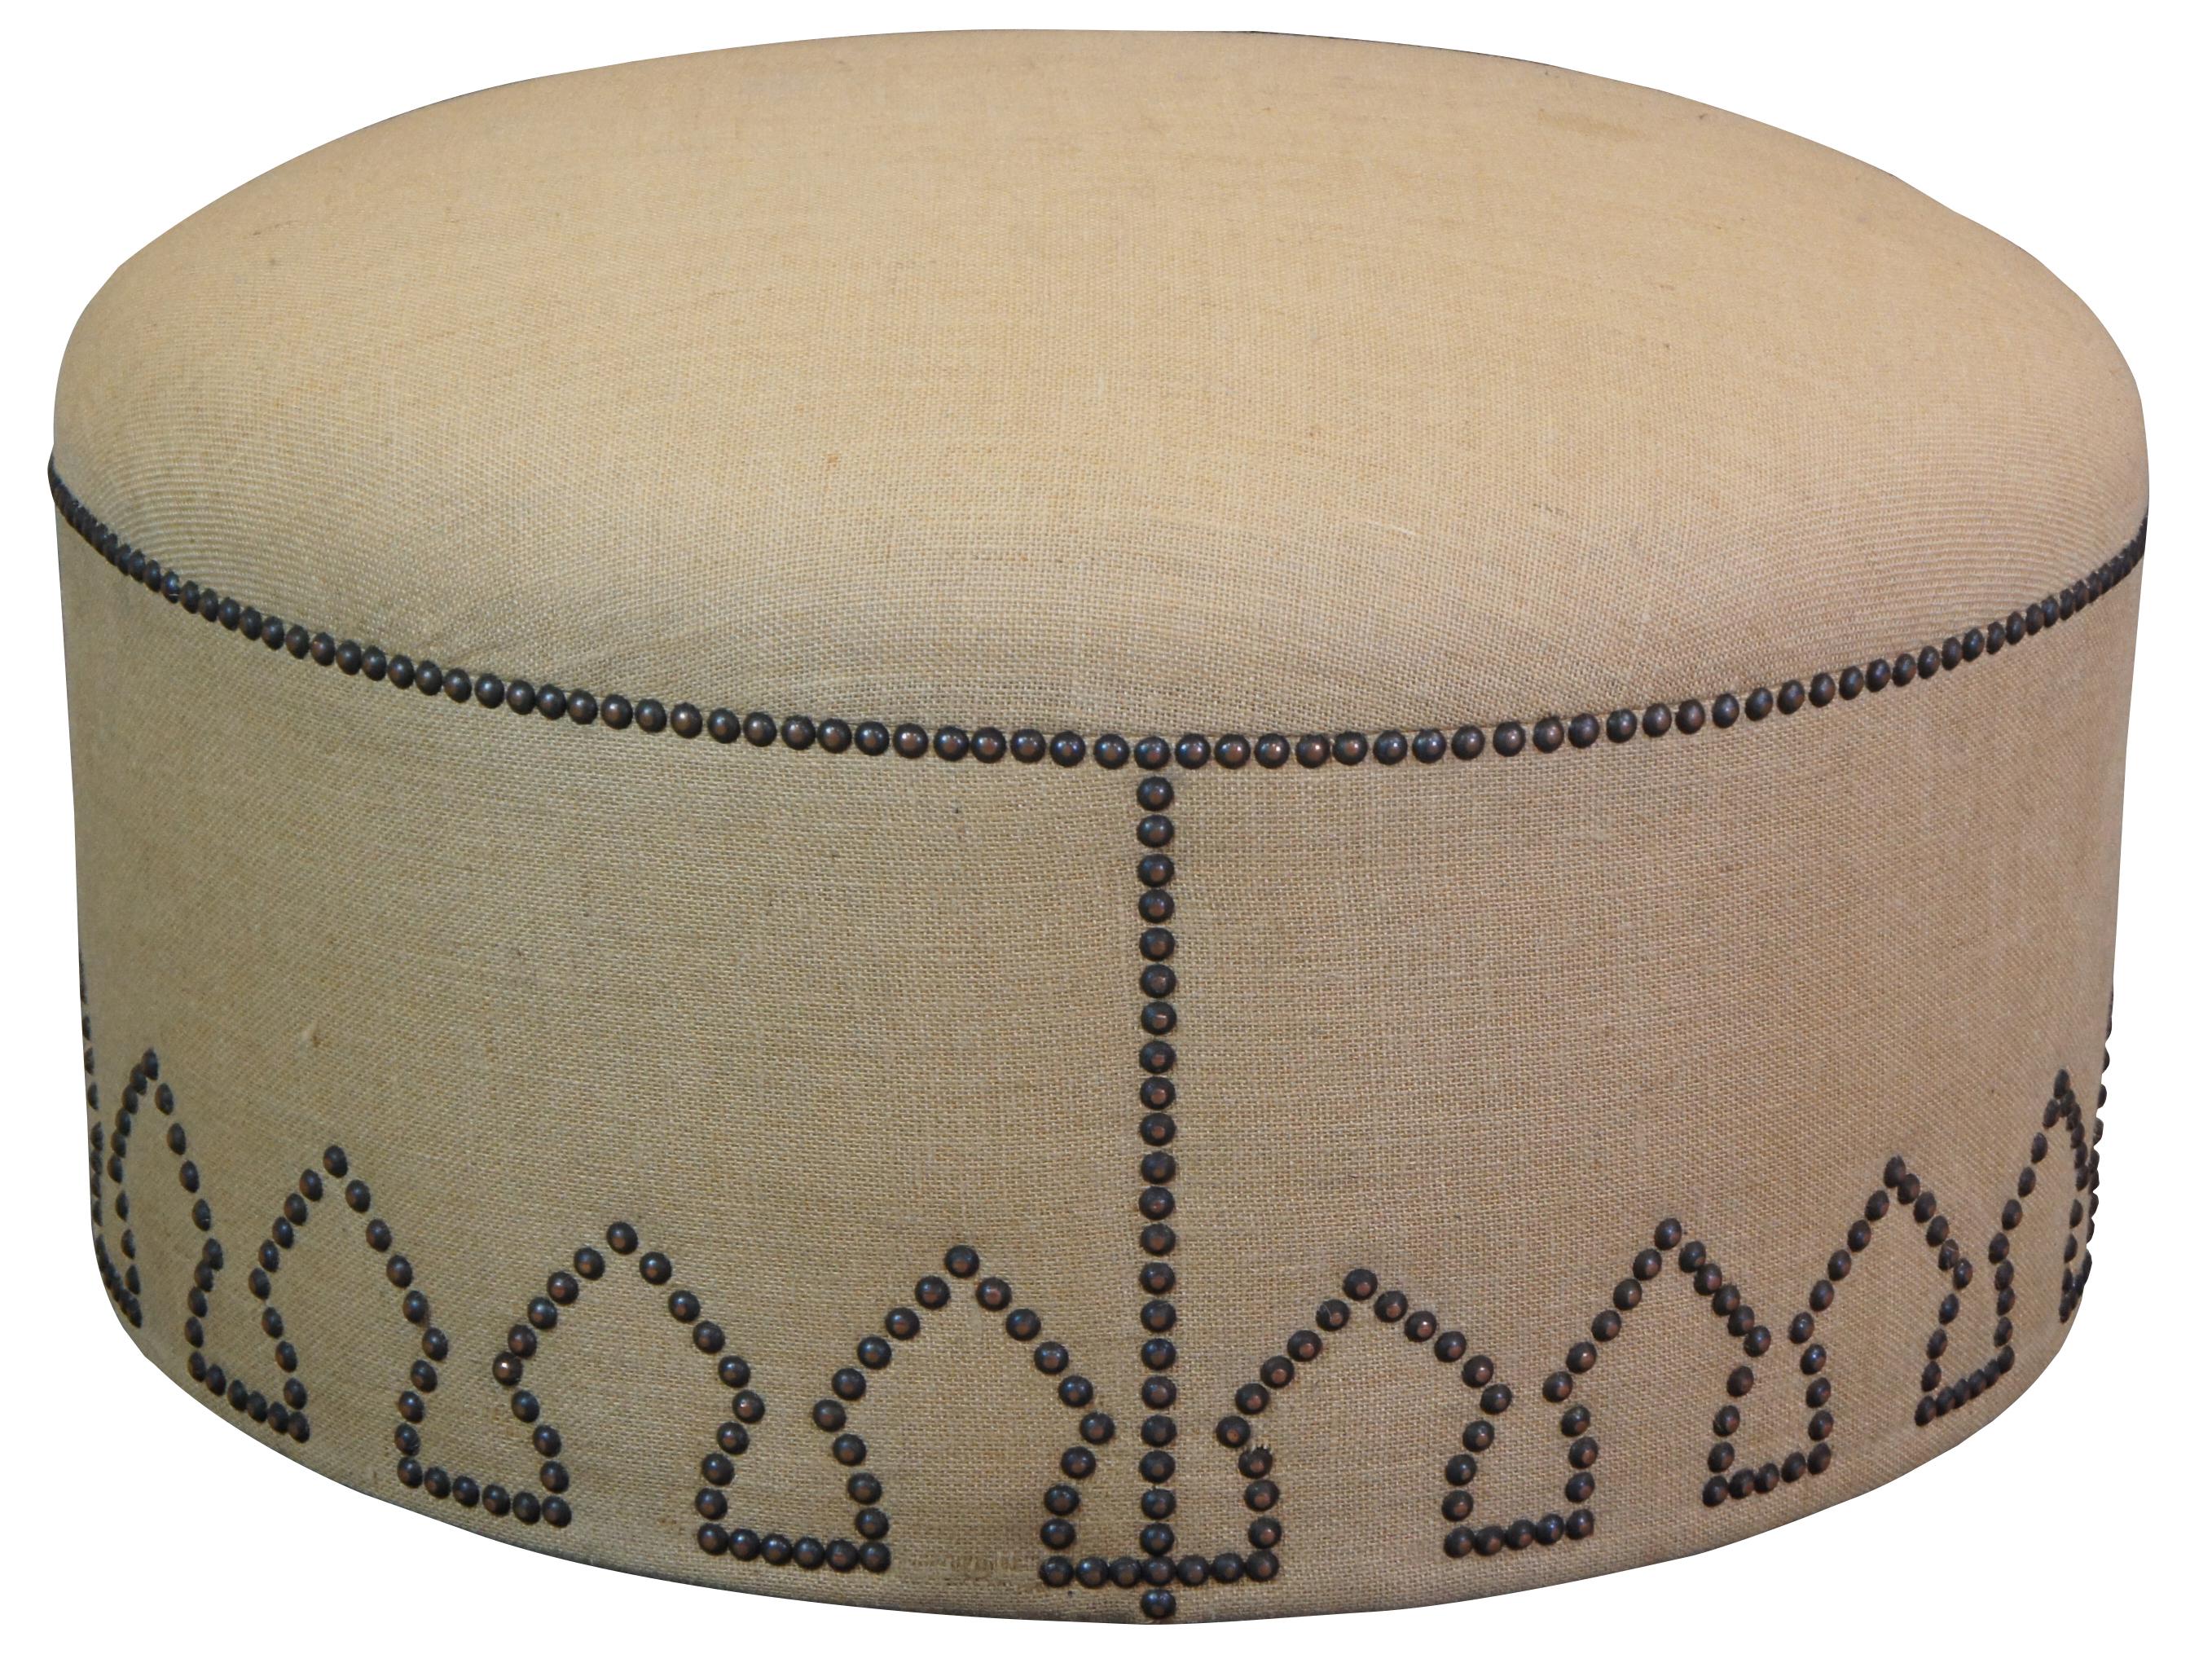 Vintage burlap ottoman, foot rest or stool featuring morrocan styling with round form and nailhead accents.
    